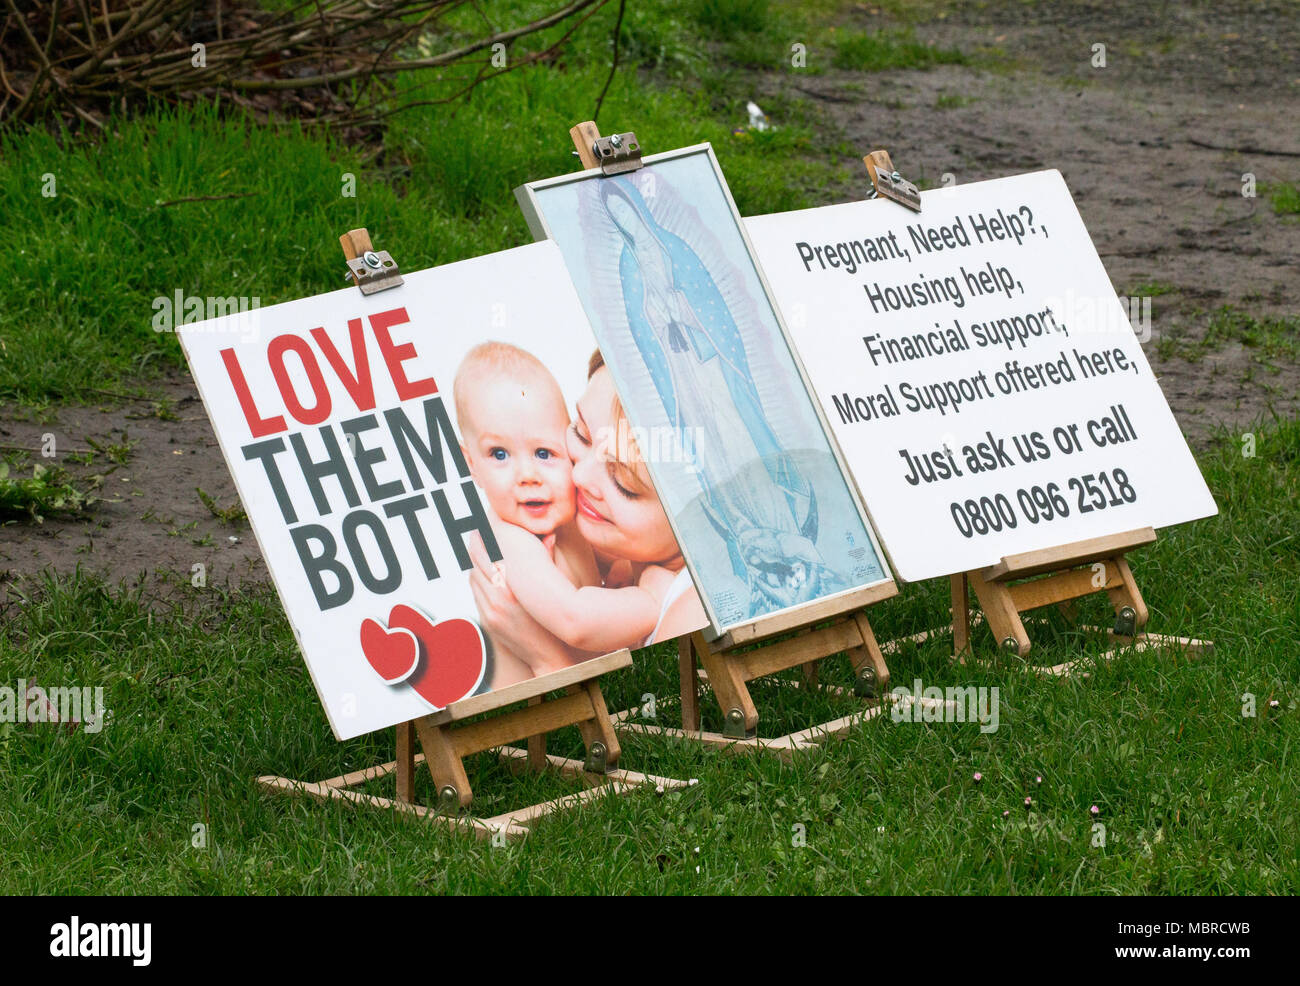 Ealing Council votes for UK's first 'Safe zone' around the Marie Stopes abortion clinic Pro-choice and anti-abortion groups have demonstrated outside. Stock Photo